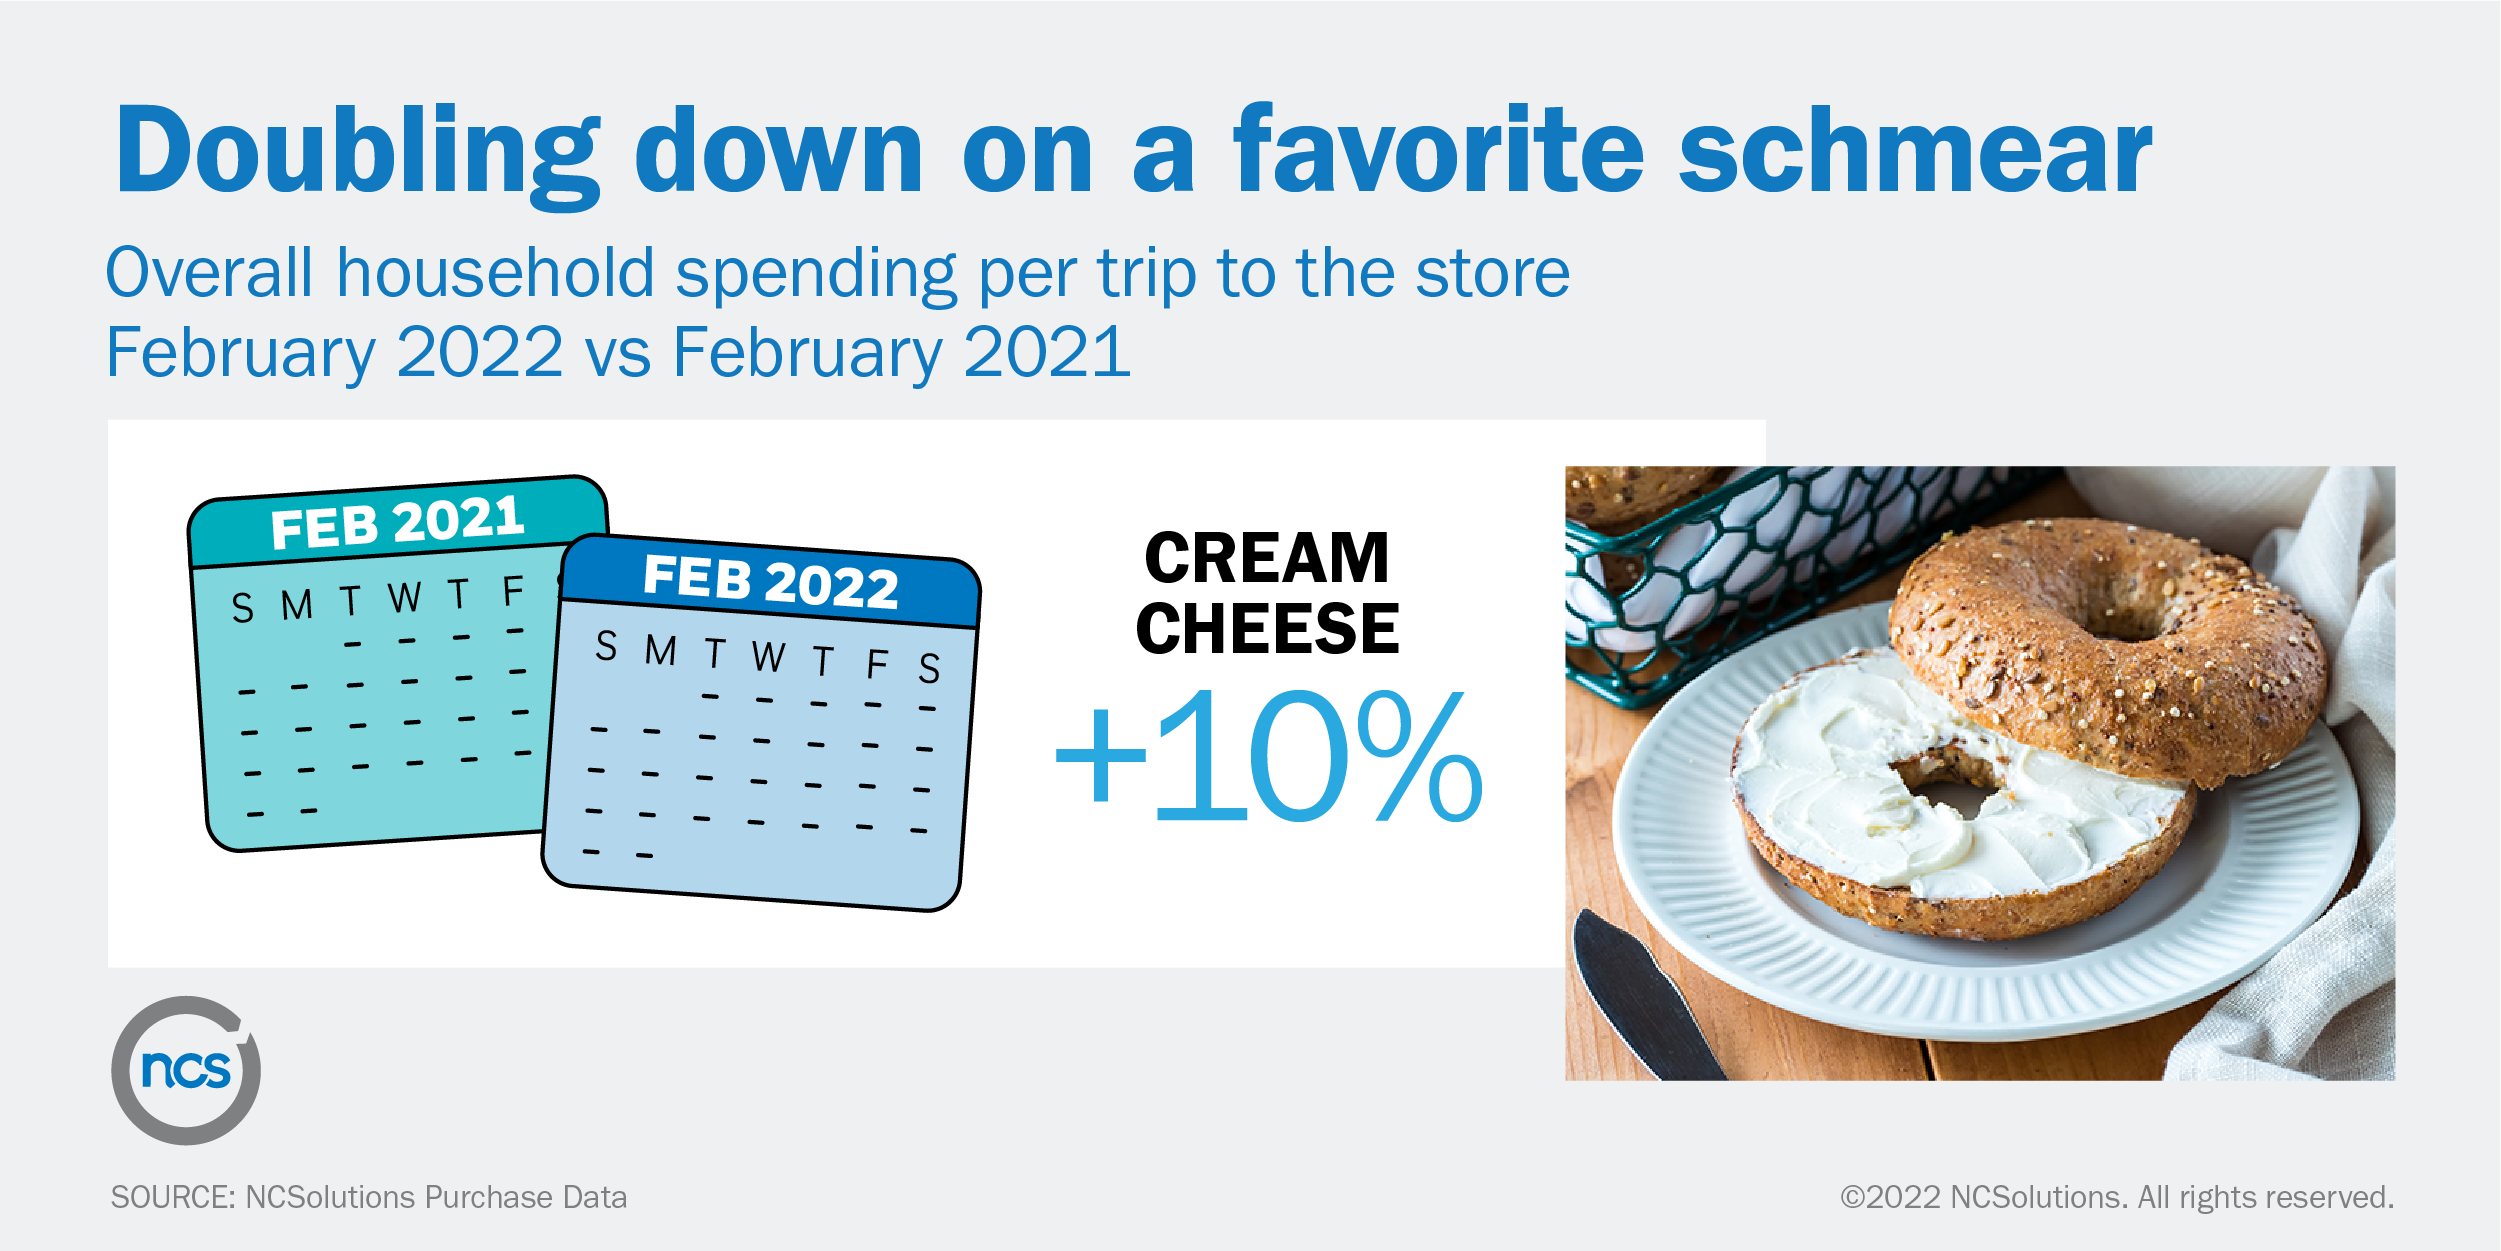 NCS displays spending per household on cream cheese